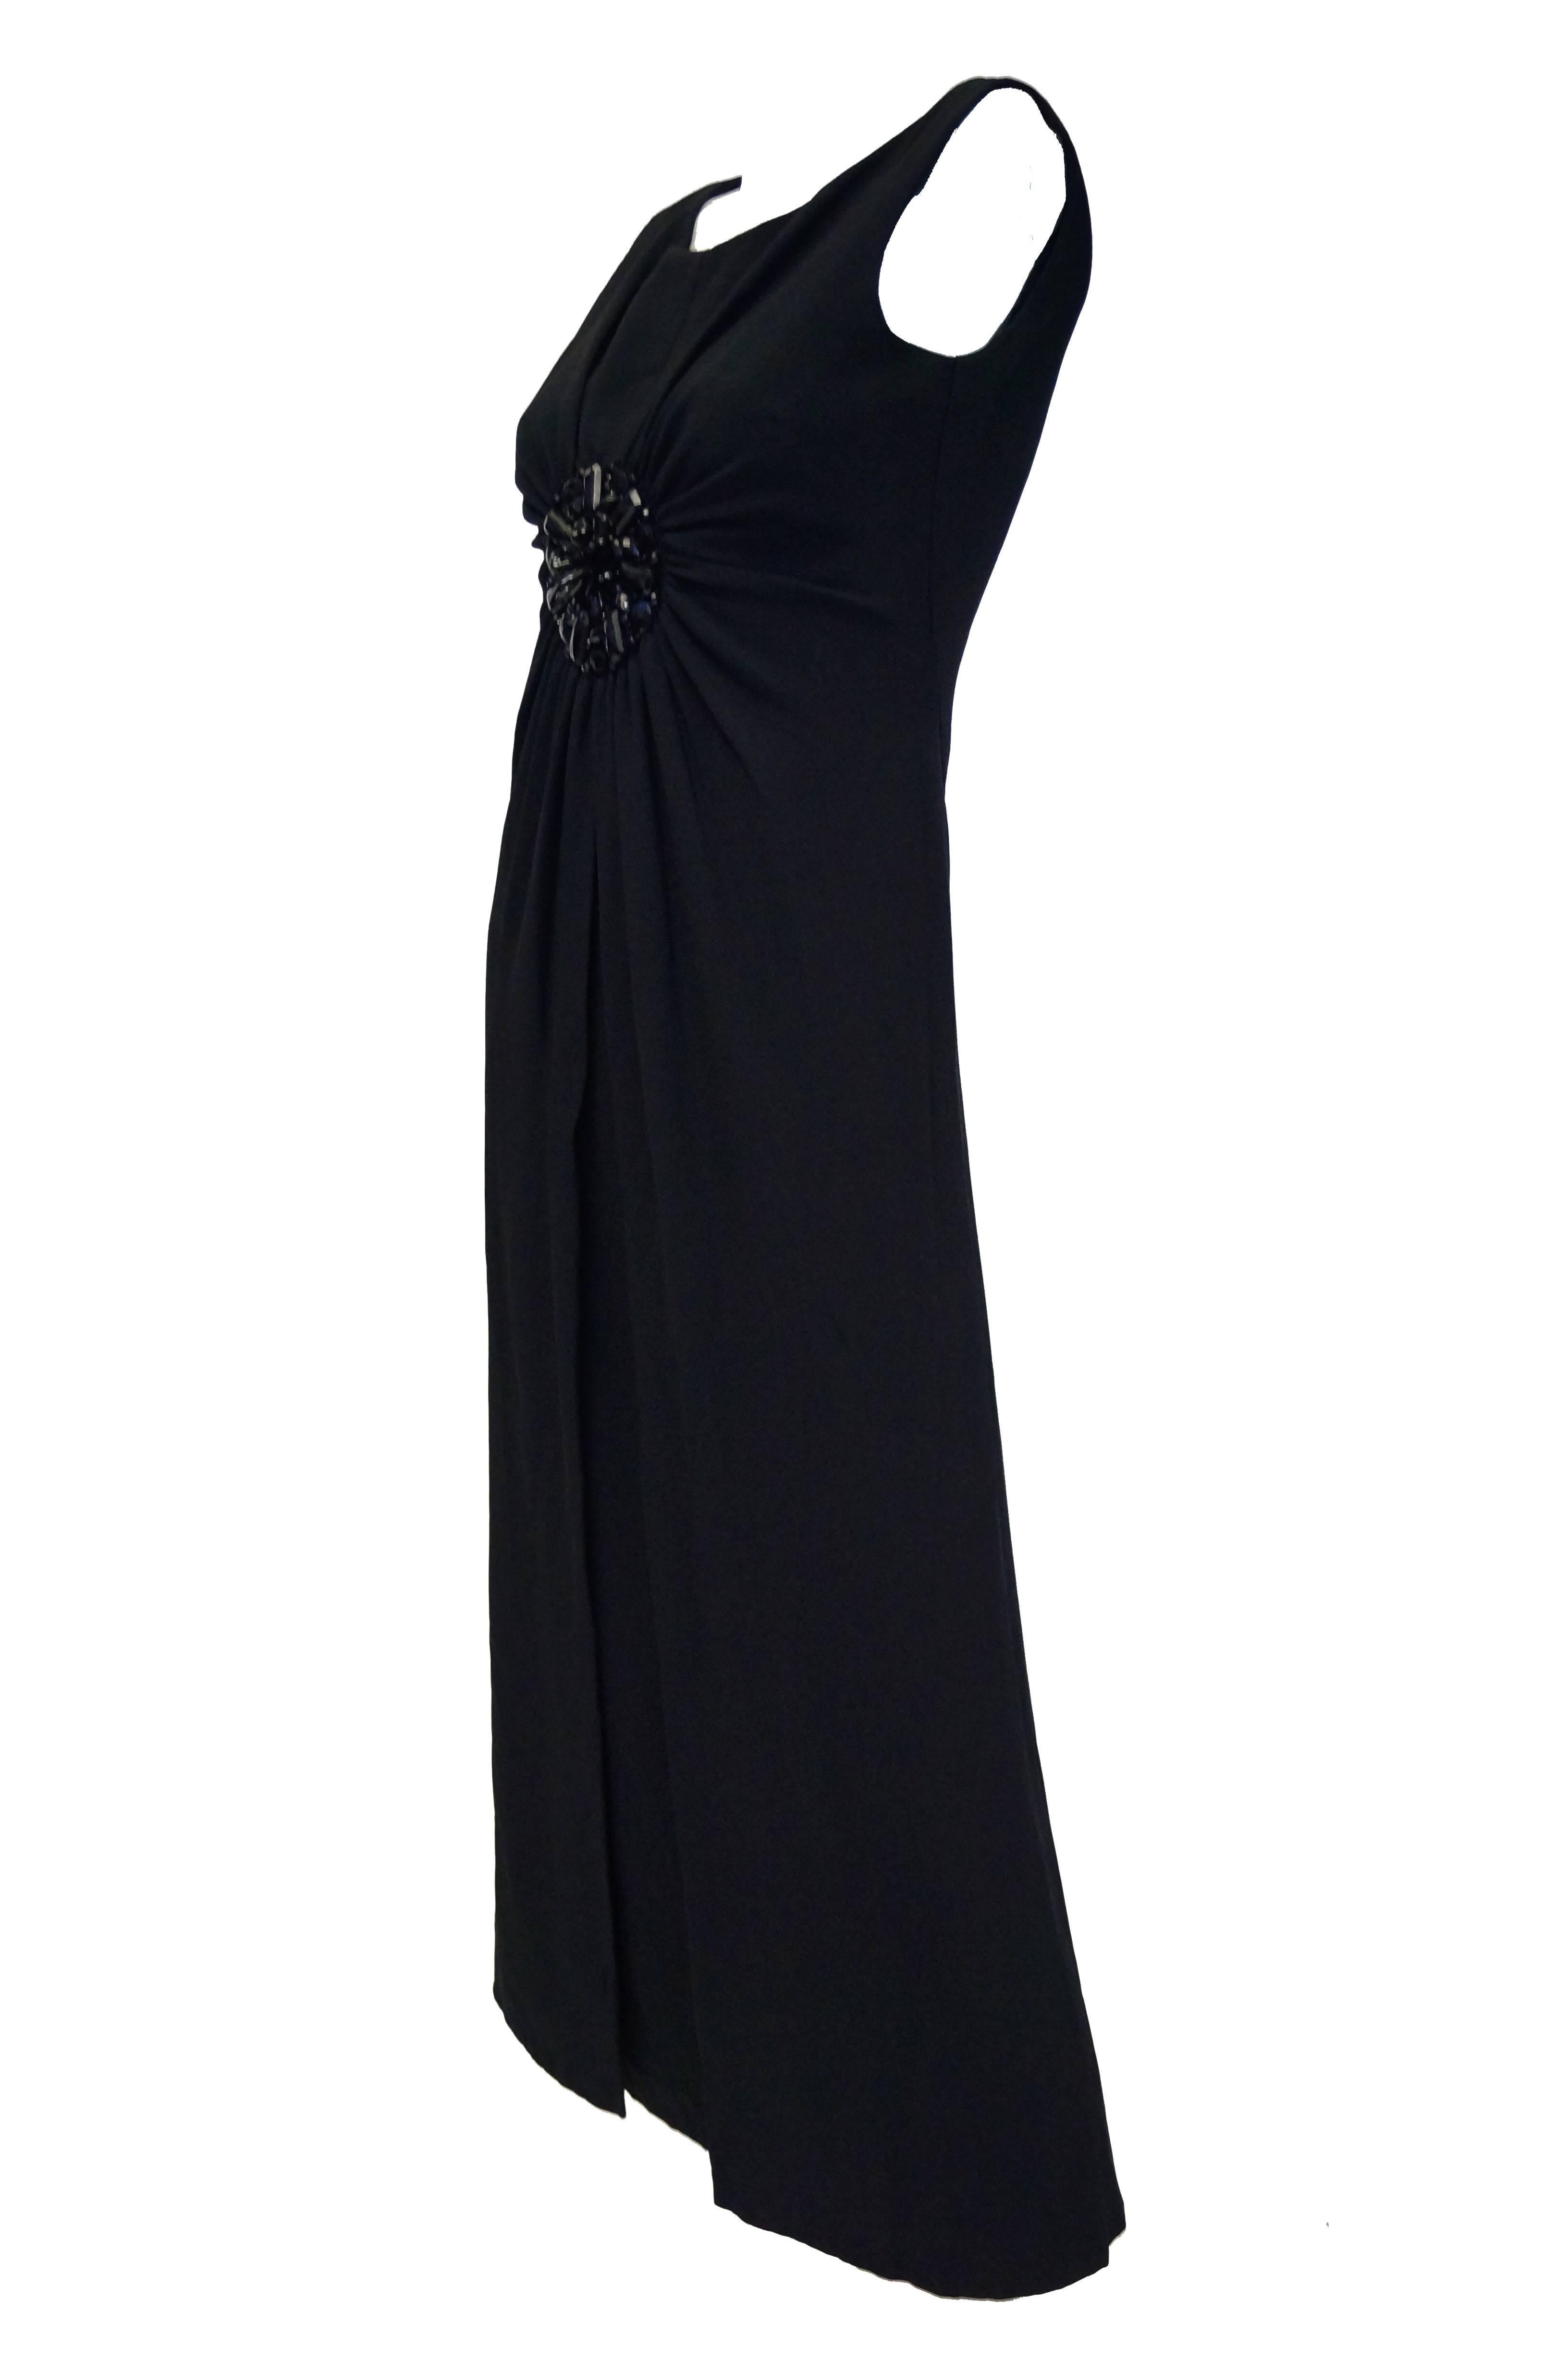 Simply Sublime and Beautiful empire waist gown by Guy Laroche! The black maxi dress is sleeveless with a high scoop neck. The dress features a beautiful cluster of black rhinestones and Rock beads centered on the front of the dress between the bust